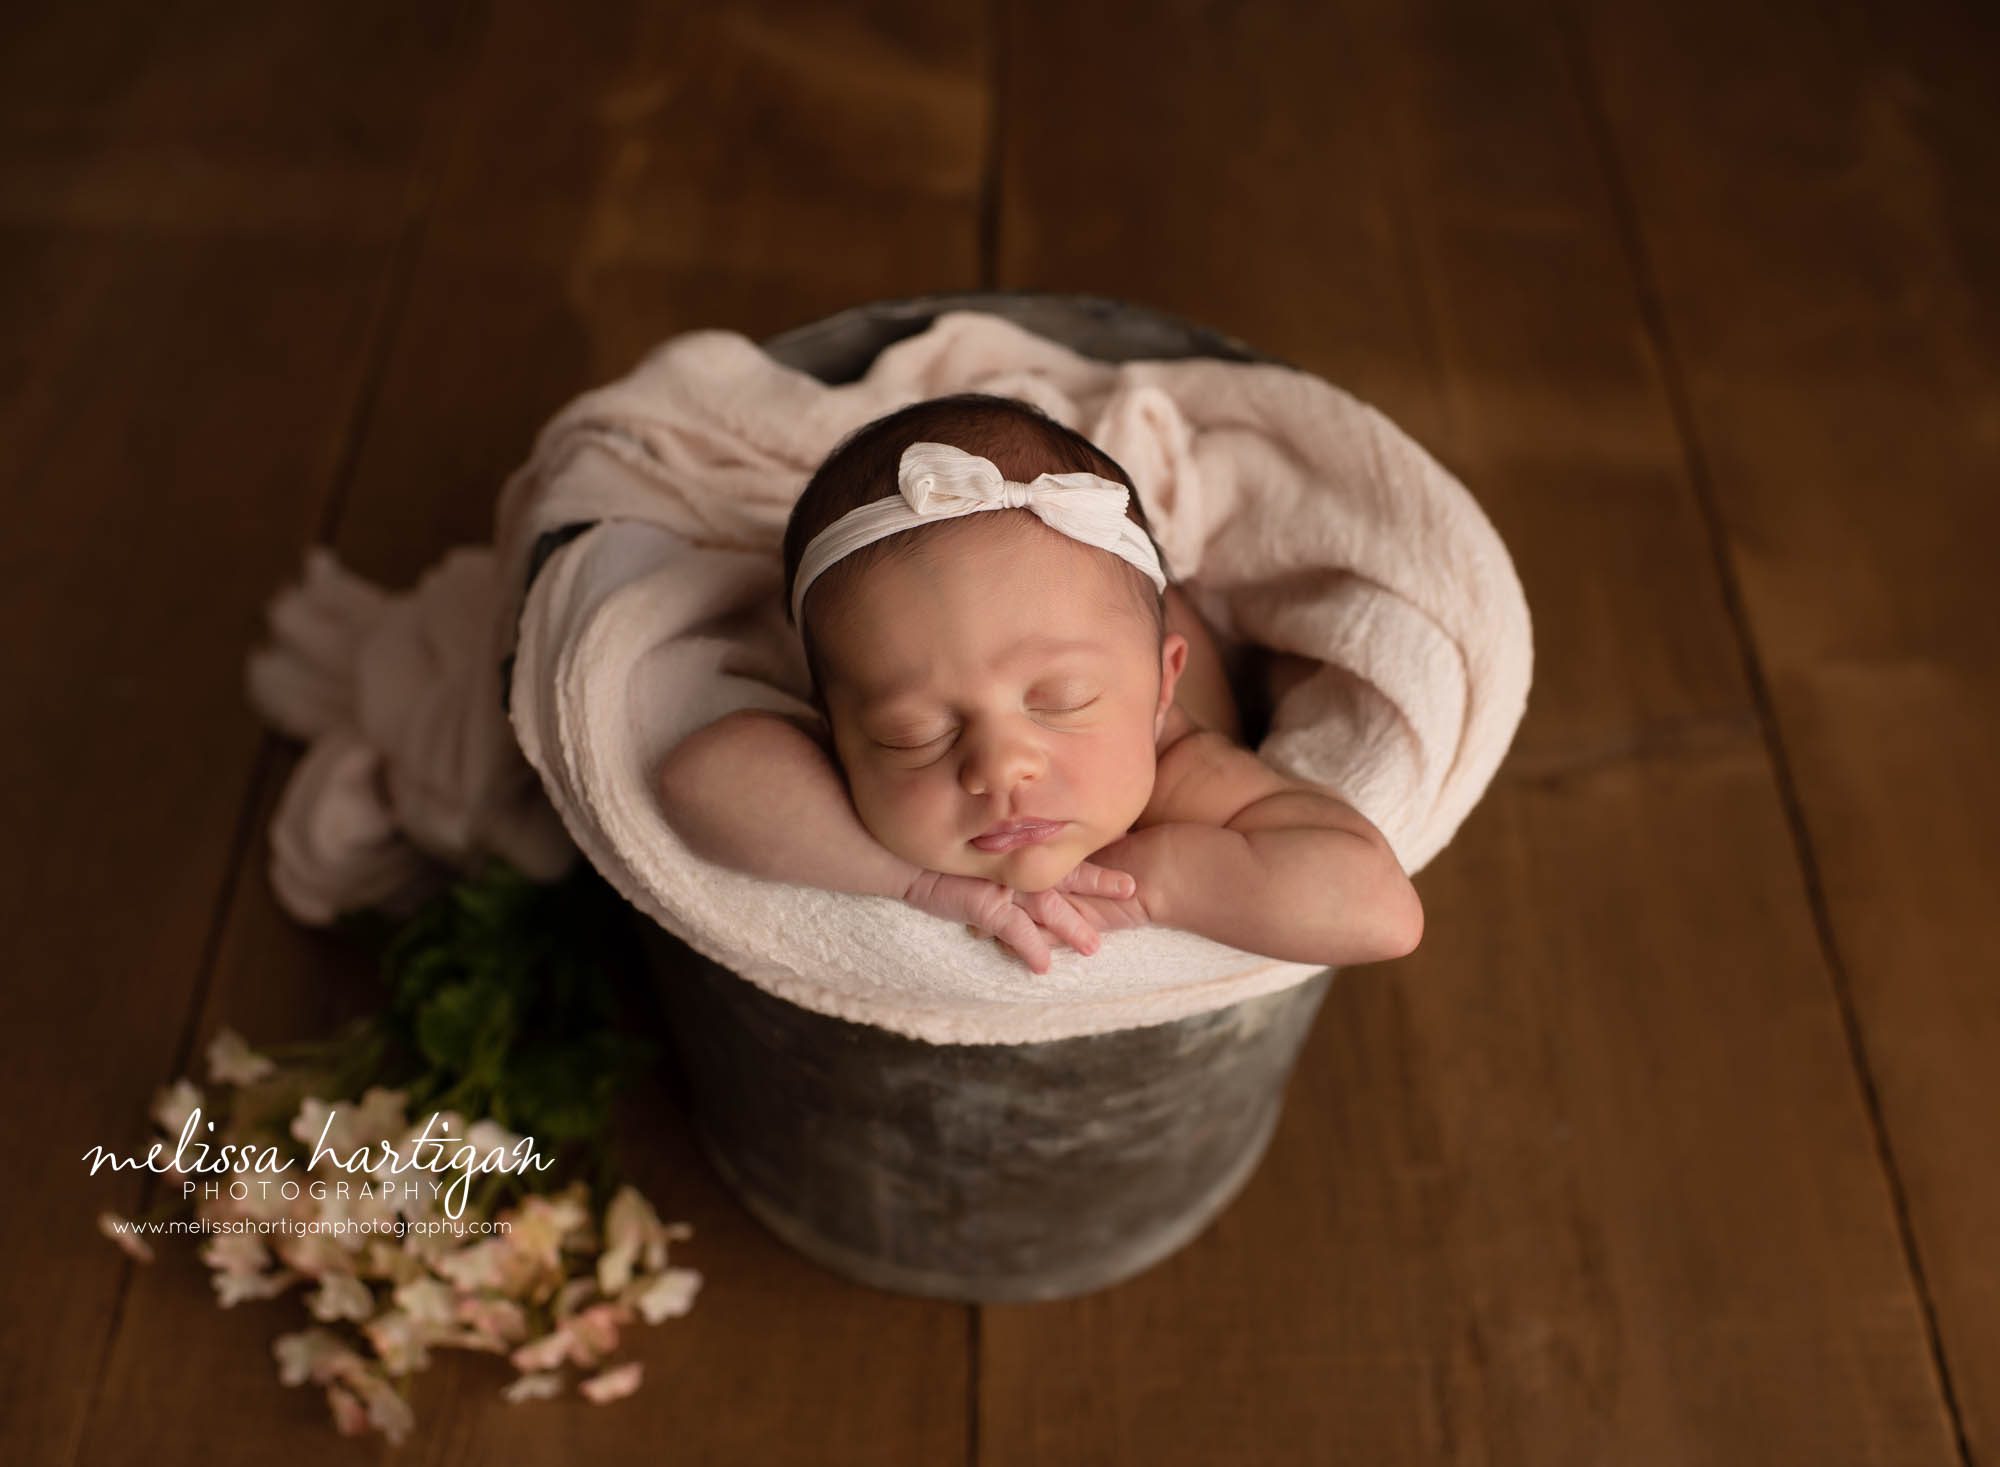 newborn baby girl posed in bucket with blush pink wrap and peach flowers on wooden boards